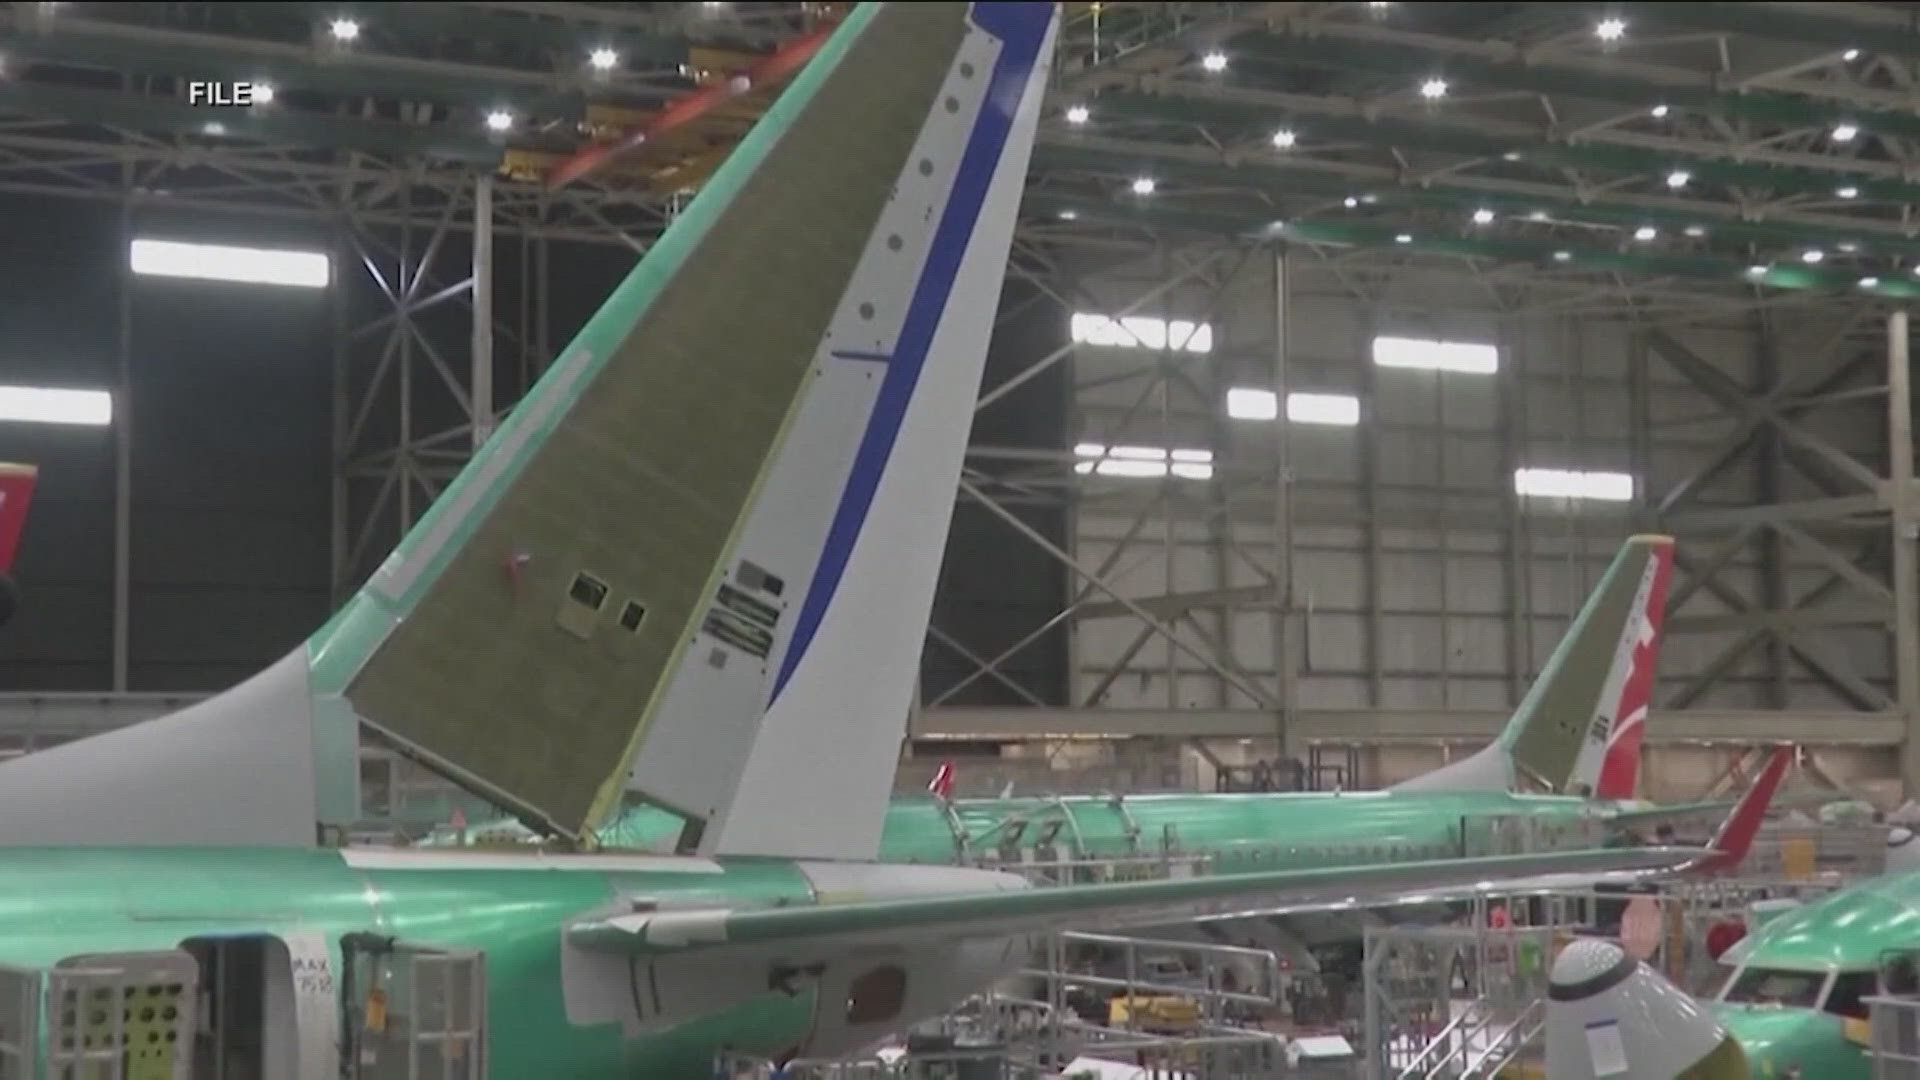 The investigation comes after multiple defects have been found on Boeing 737 jets.